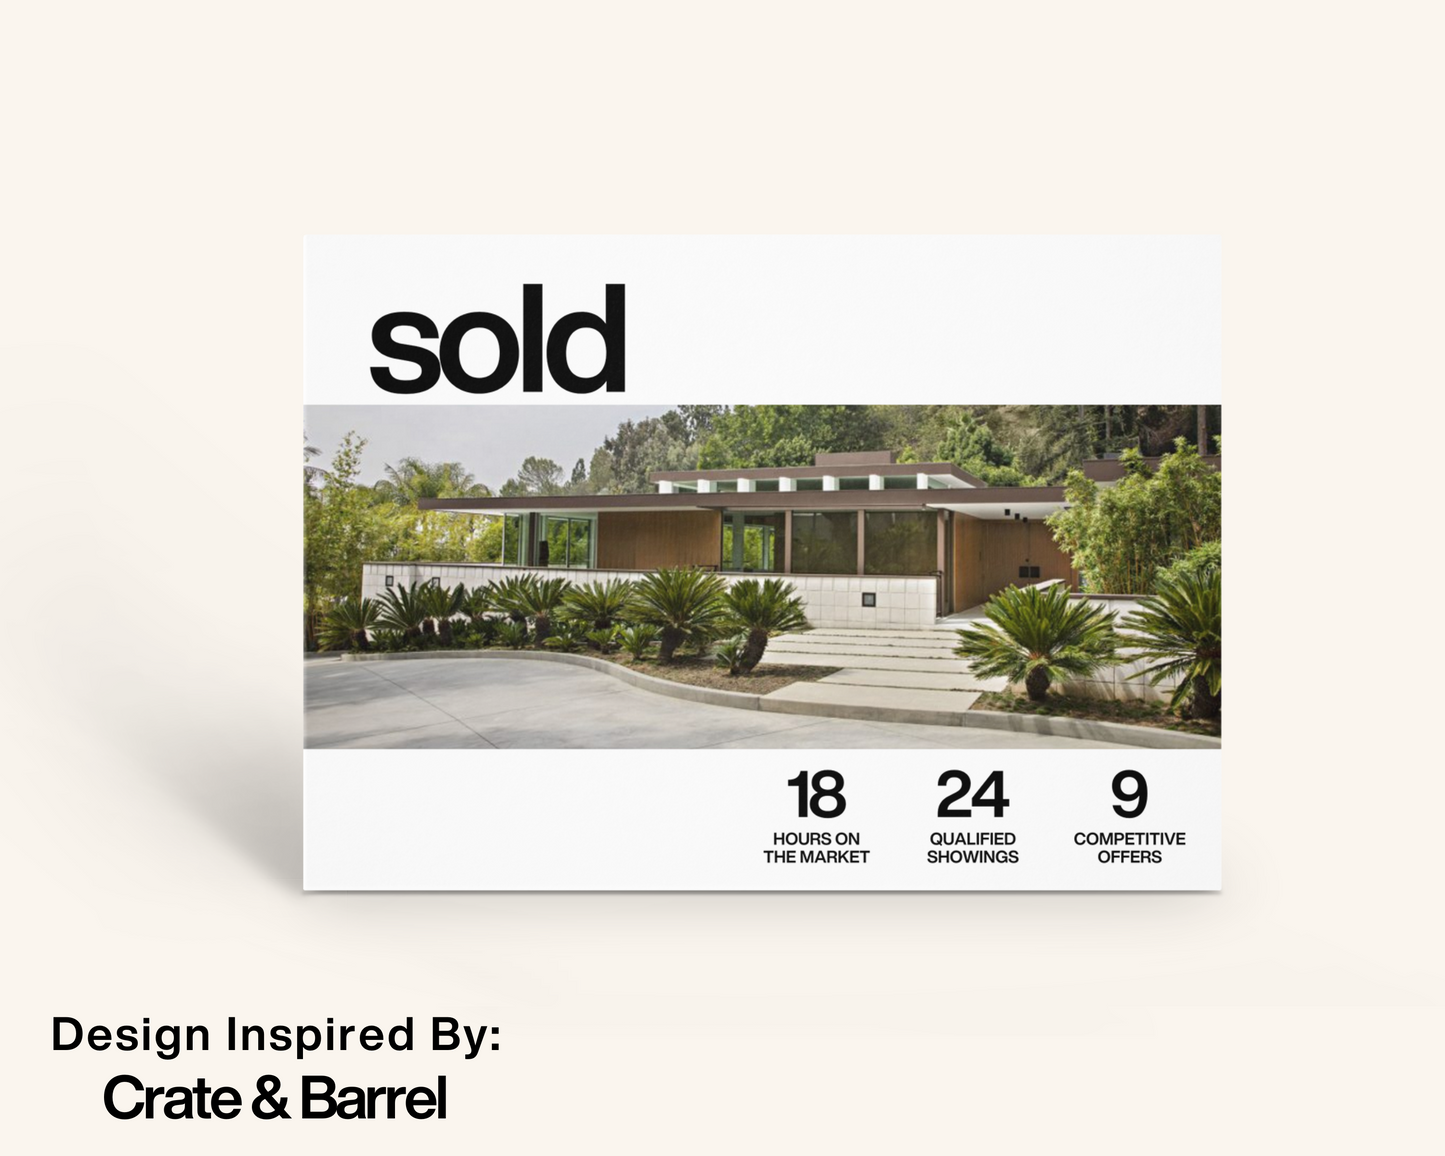 Just Sold Postcard for Real Estate Agents Sold Postcard Realtors Postcard Hello Neighbor Postcard Real Estate Farming Postcard Template